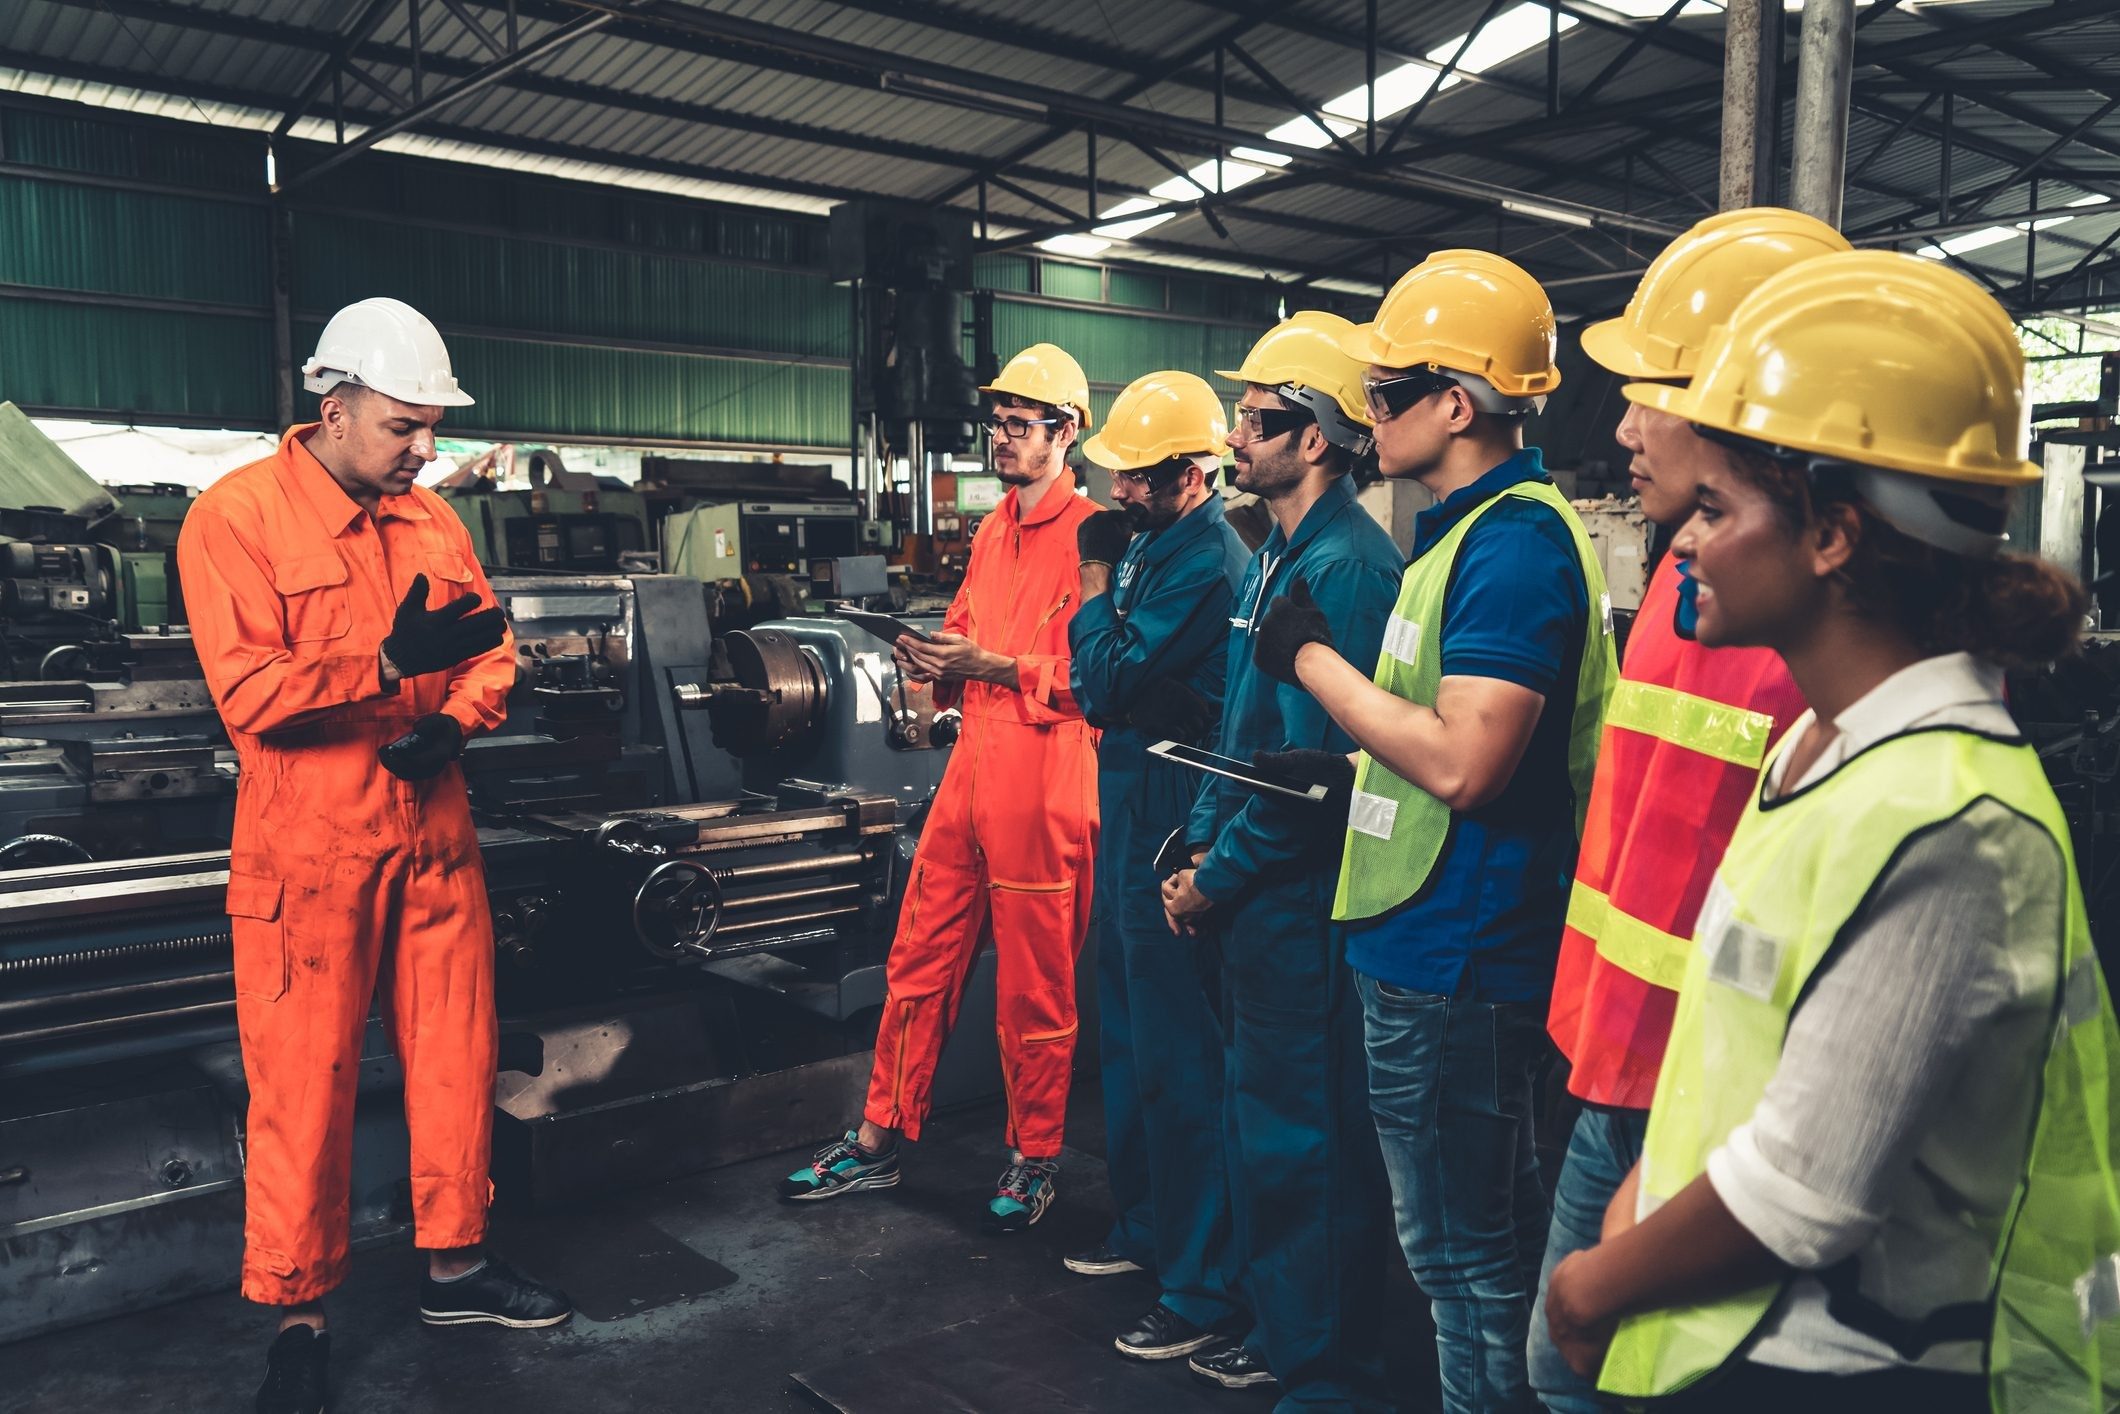 Why You Should Consider Onsite Safety Training Courses for Your Edmonton Area Business